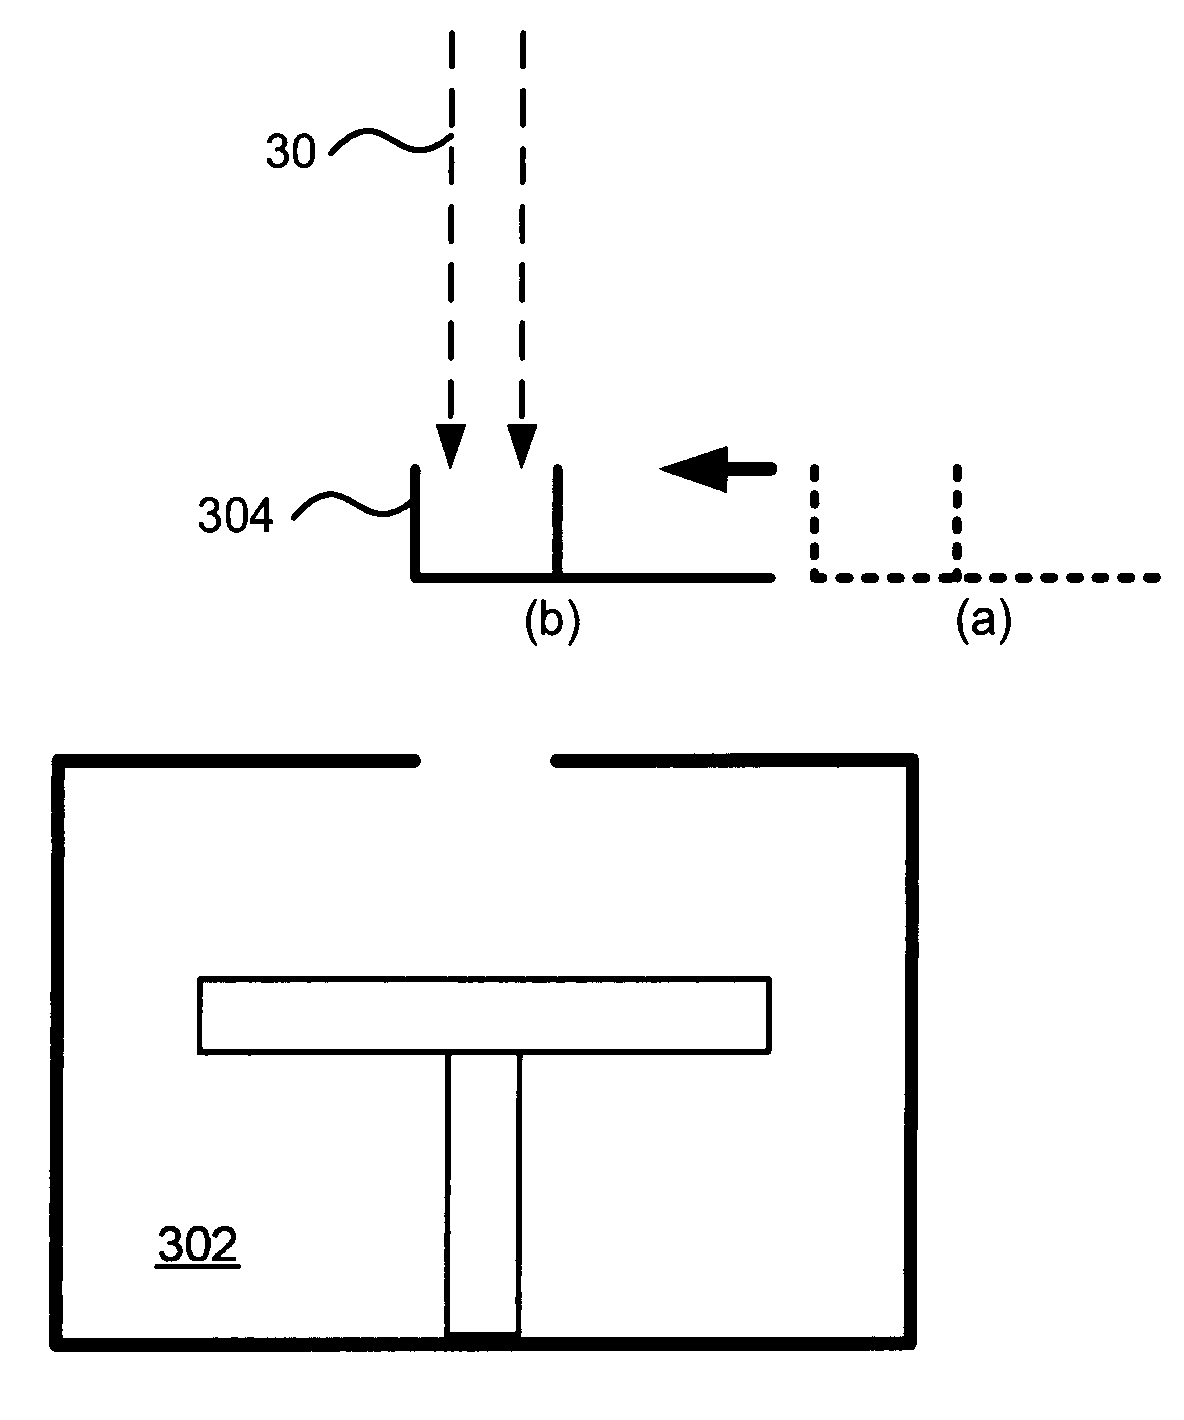 Technique for improving performance and extending lifetime of indirectly heated cathode ion source